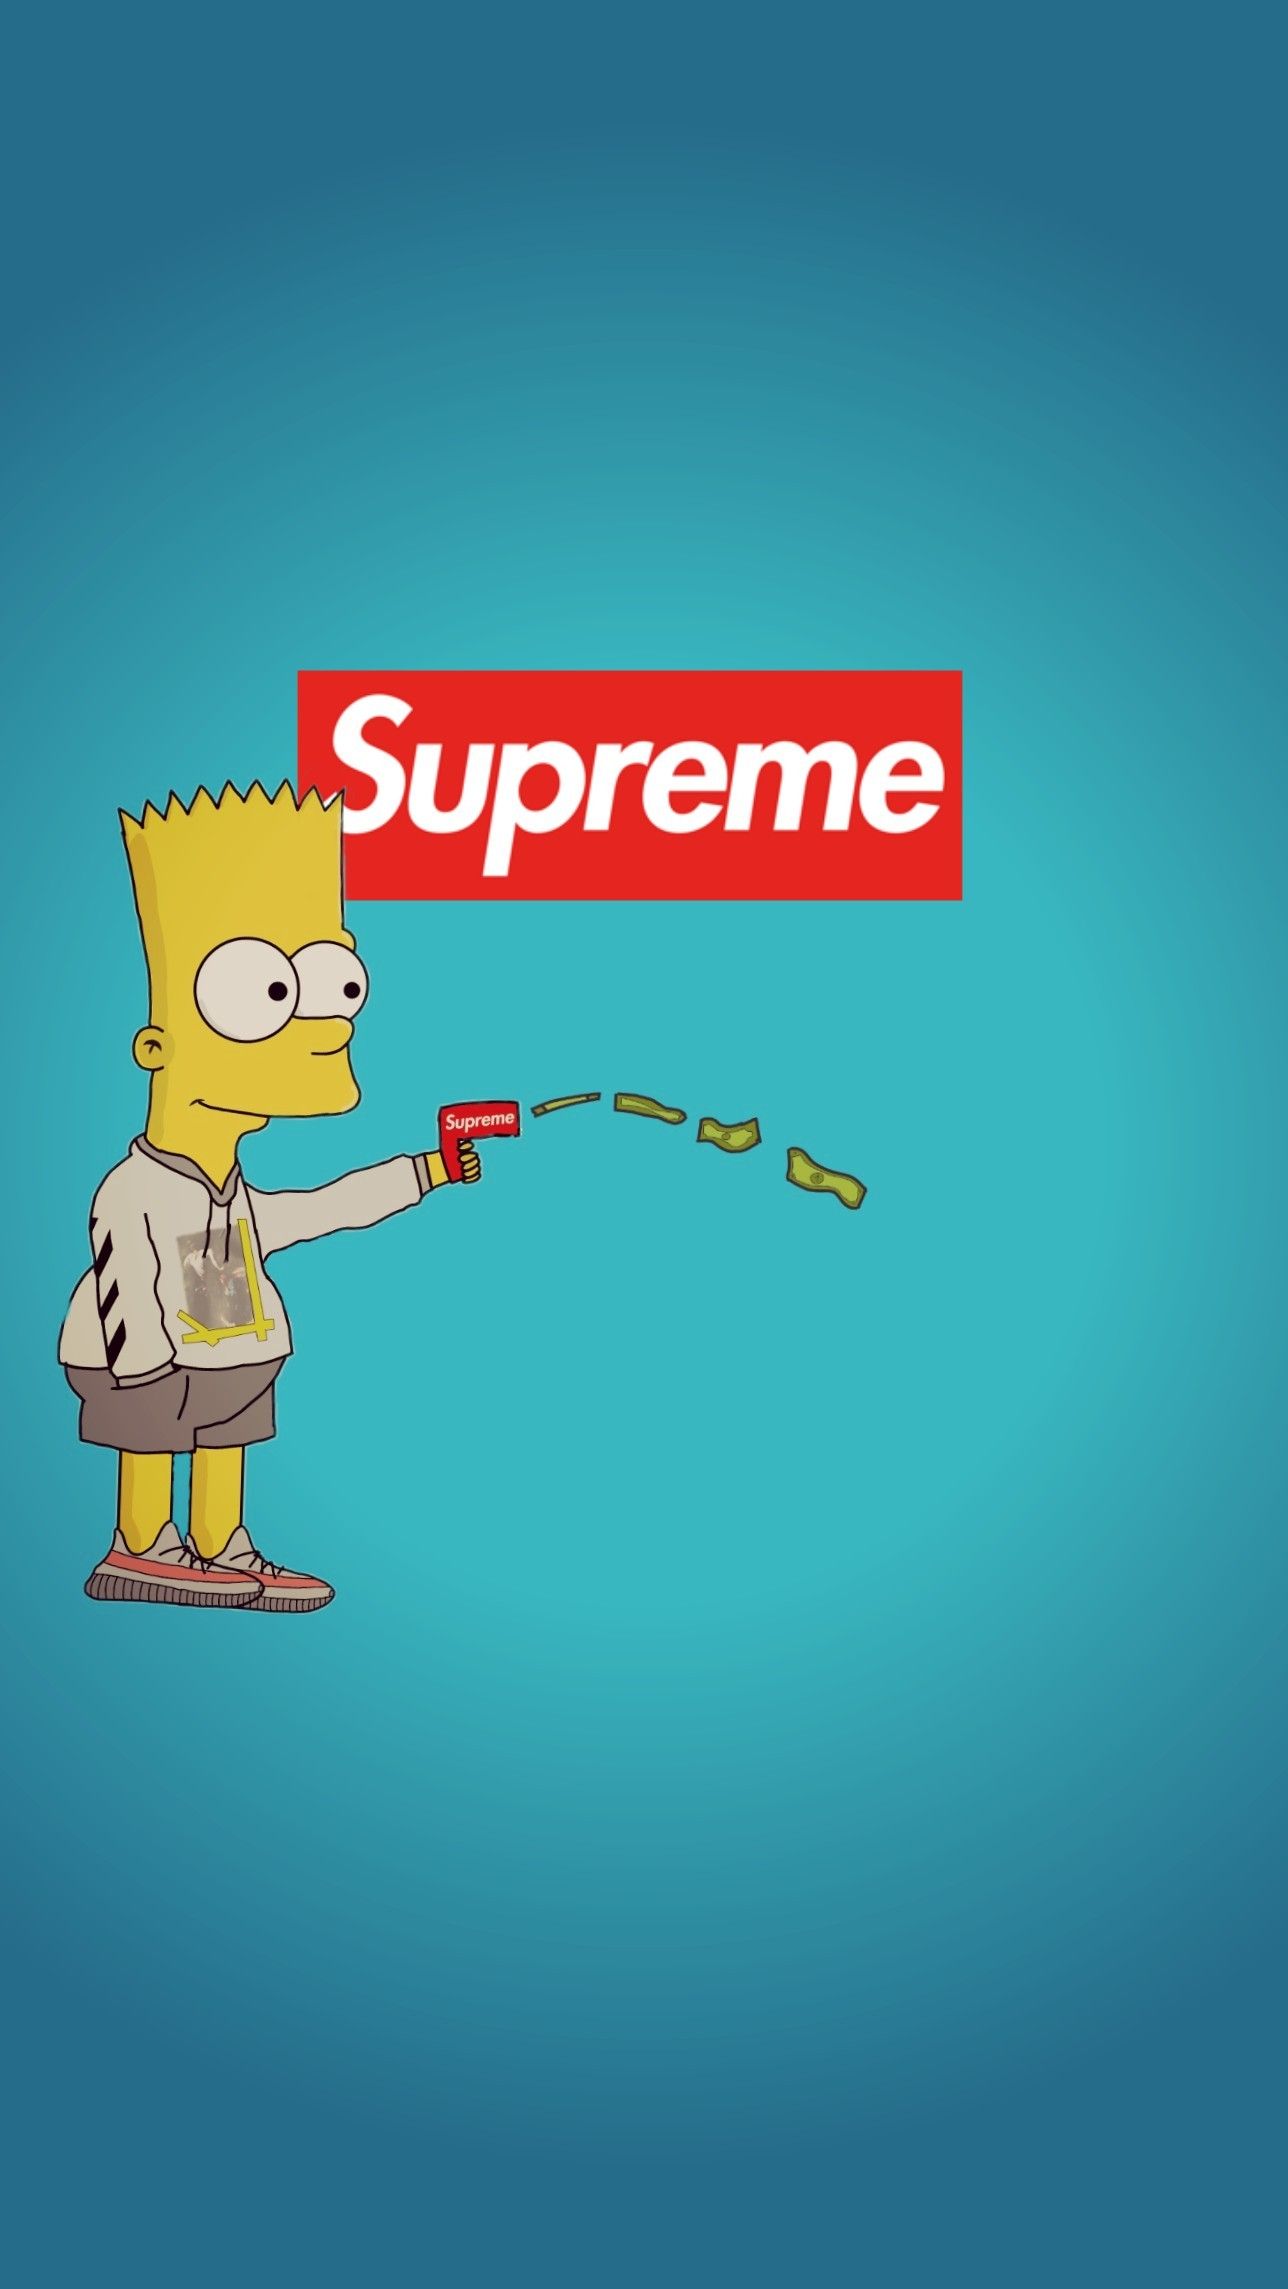 Cool Bart Simpson Gucci Wallpapers